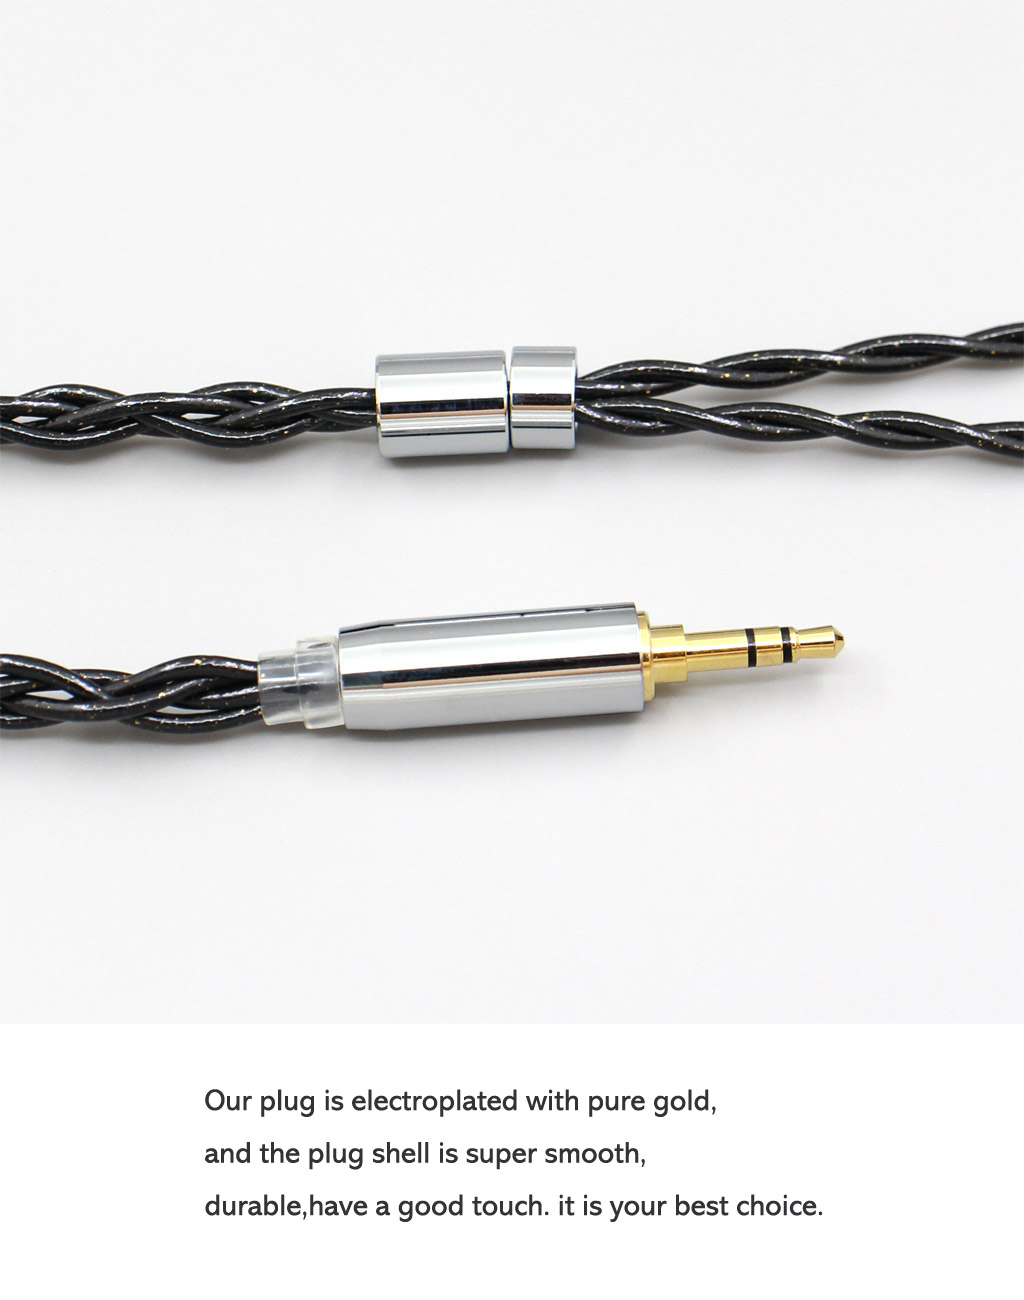 99% Pure Silver Palladium Graphene Floating Gold Cable 